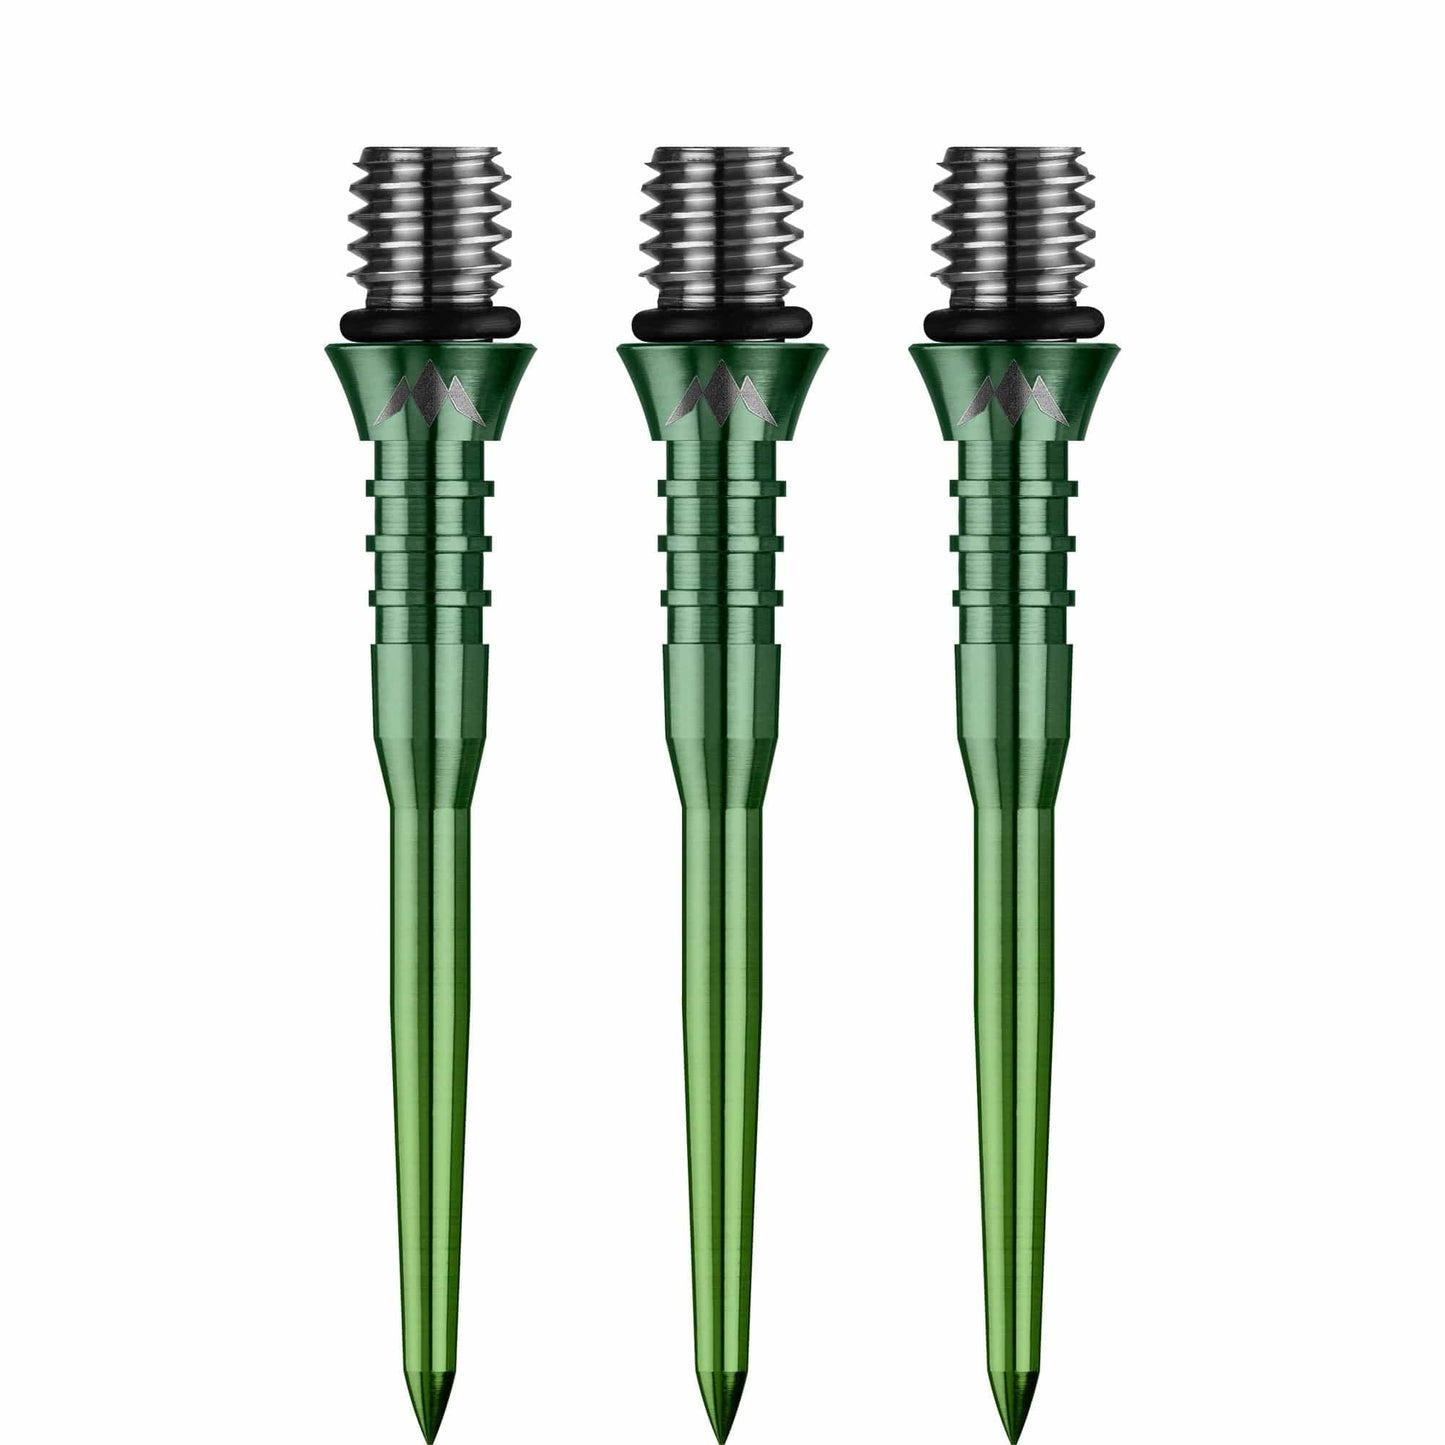 Mission Titan Pro Ti Conversion Points - Grooved - Gradient Green 30mm